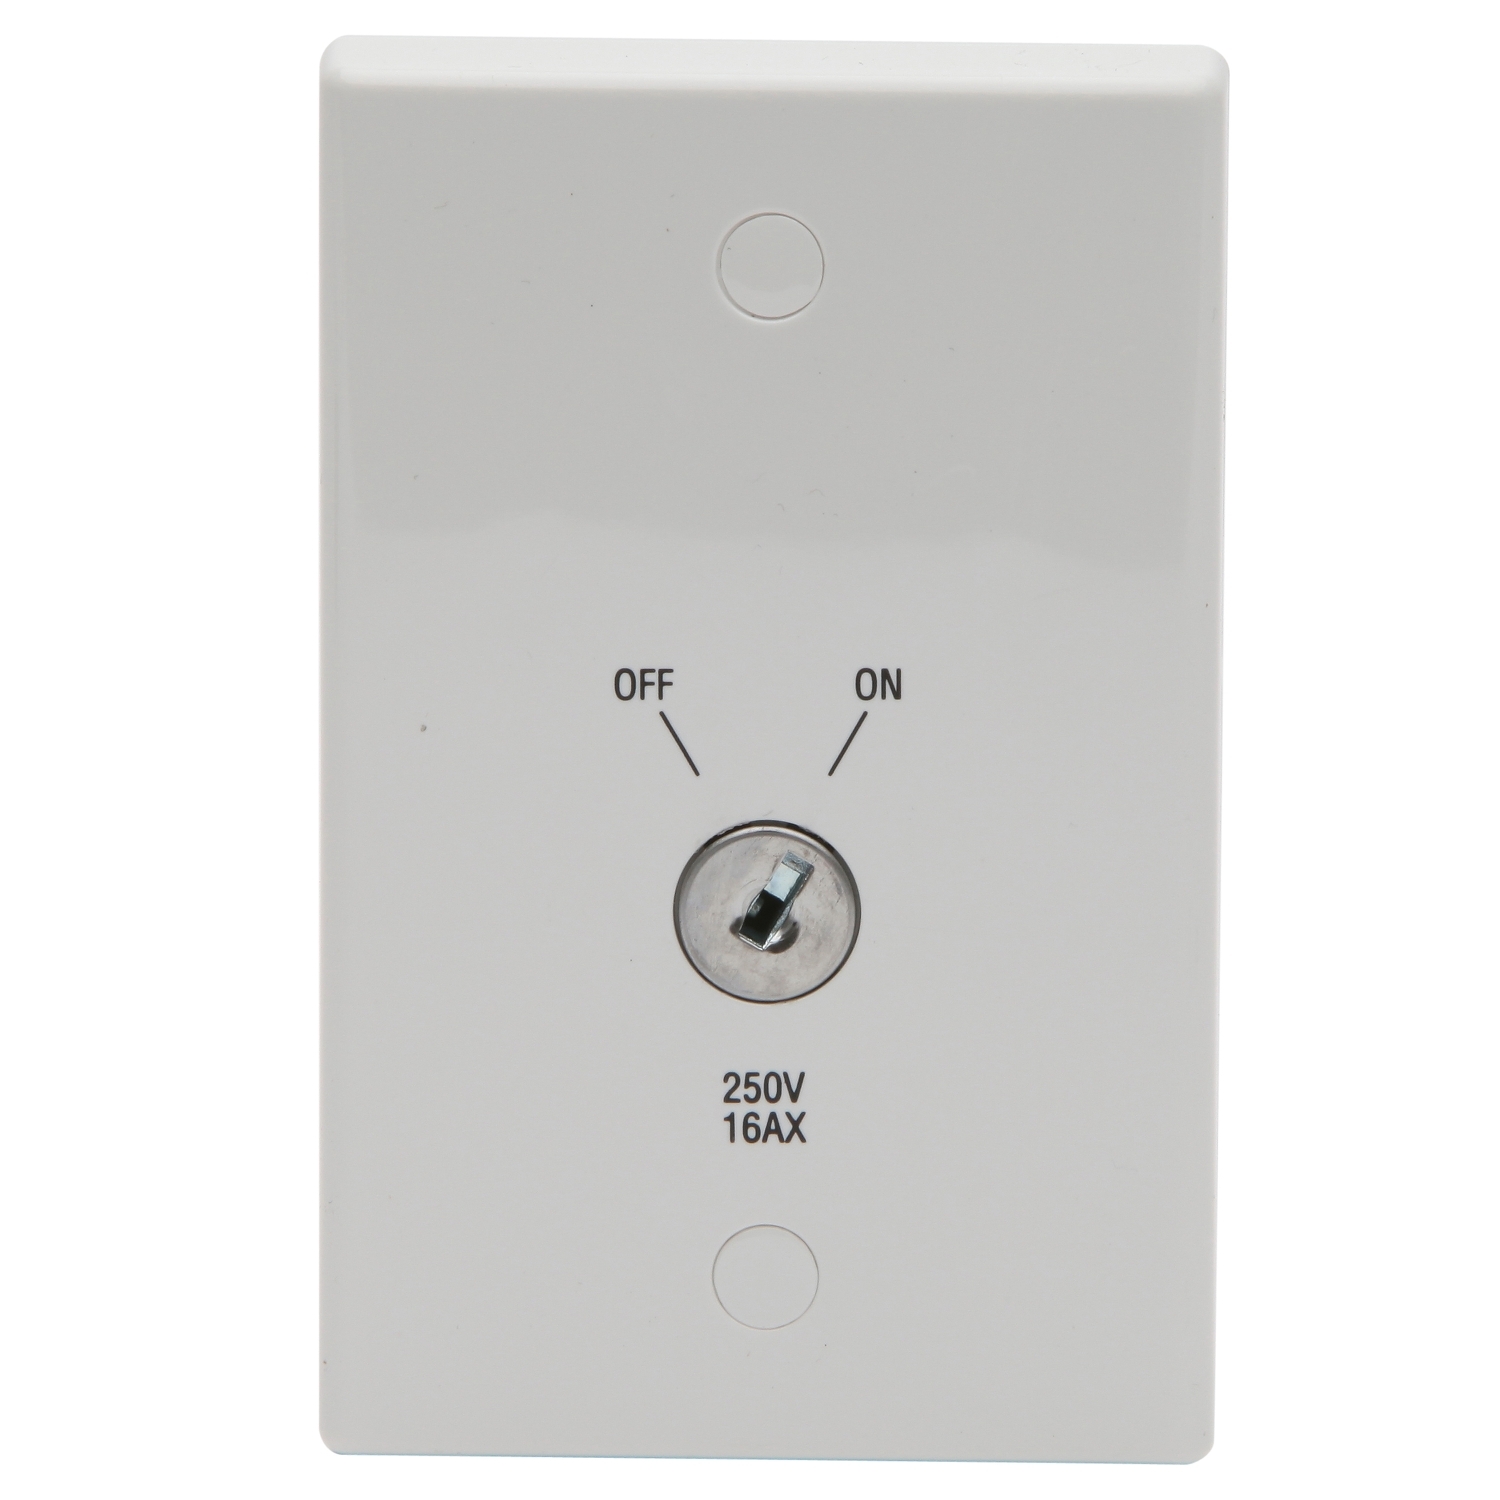 PDL - Common Keylock Switch Lockable 2-Way ON/OFF 16A 250V - White